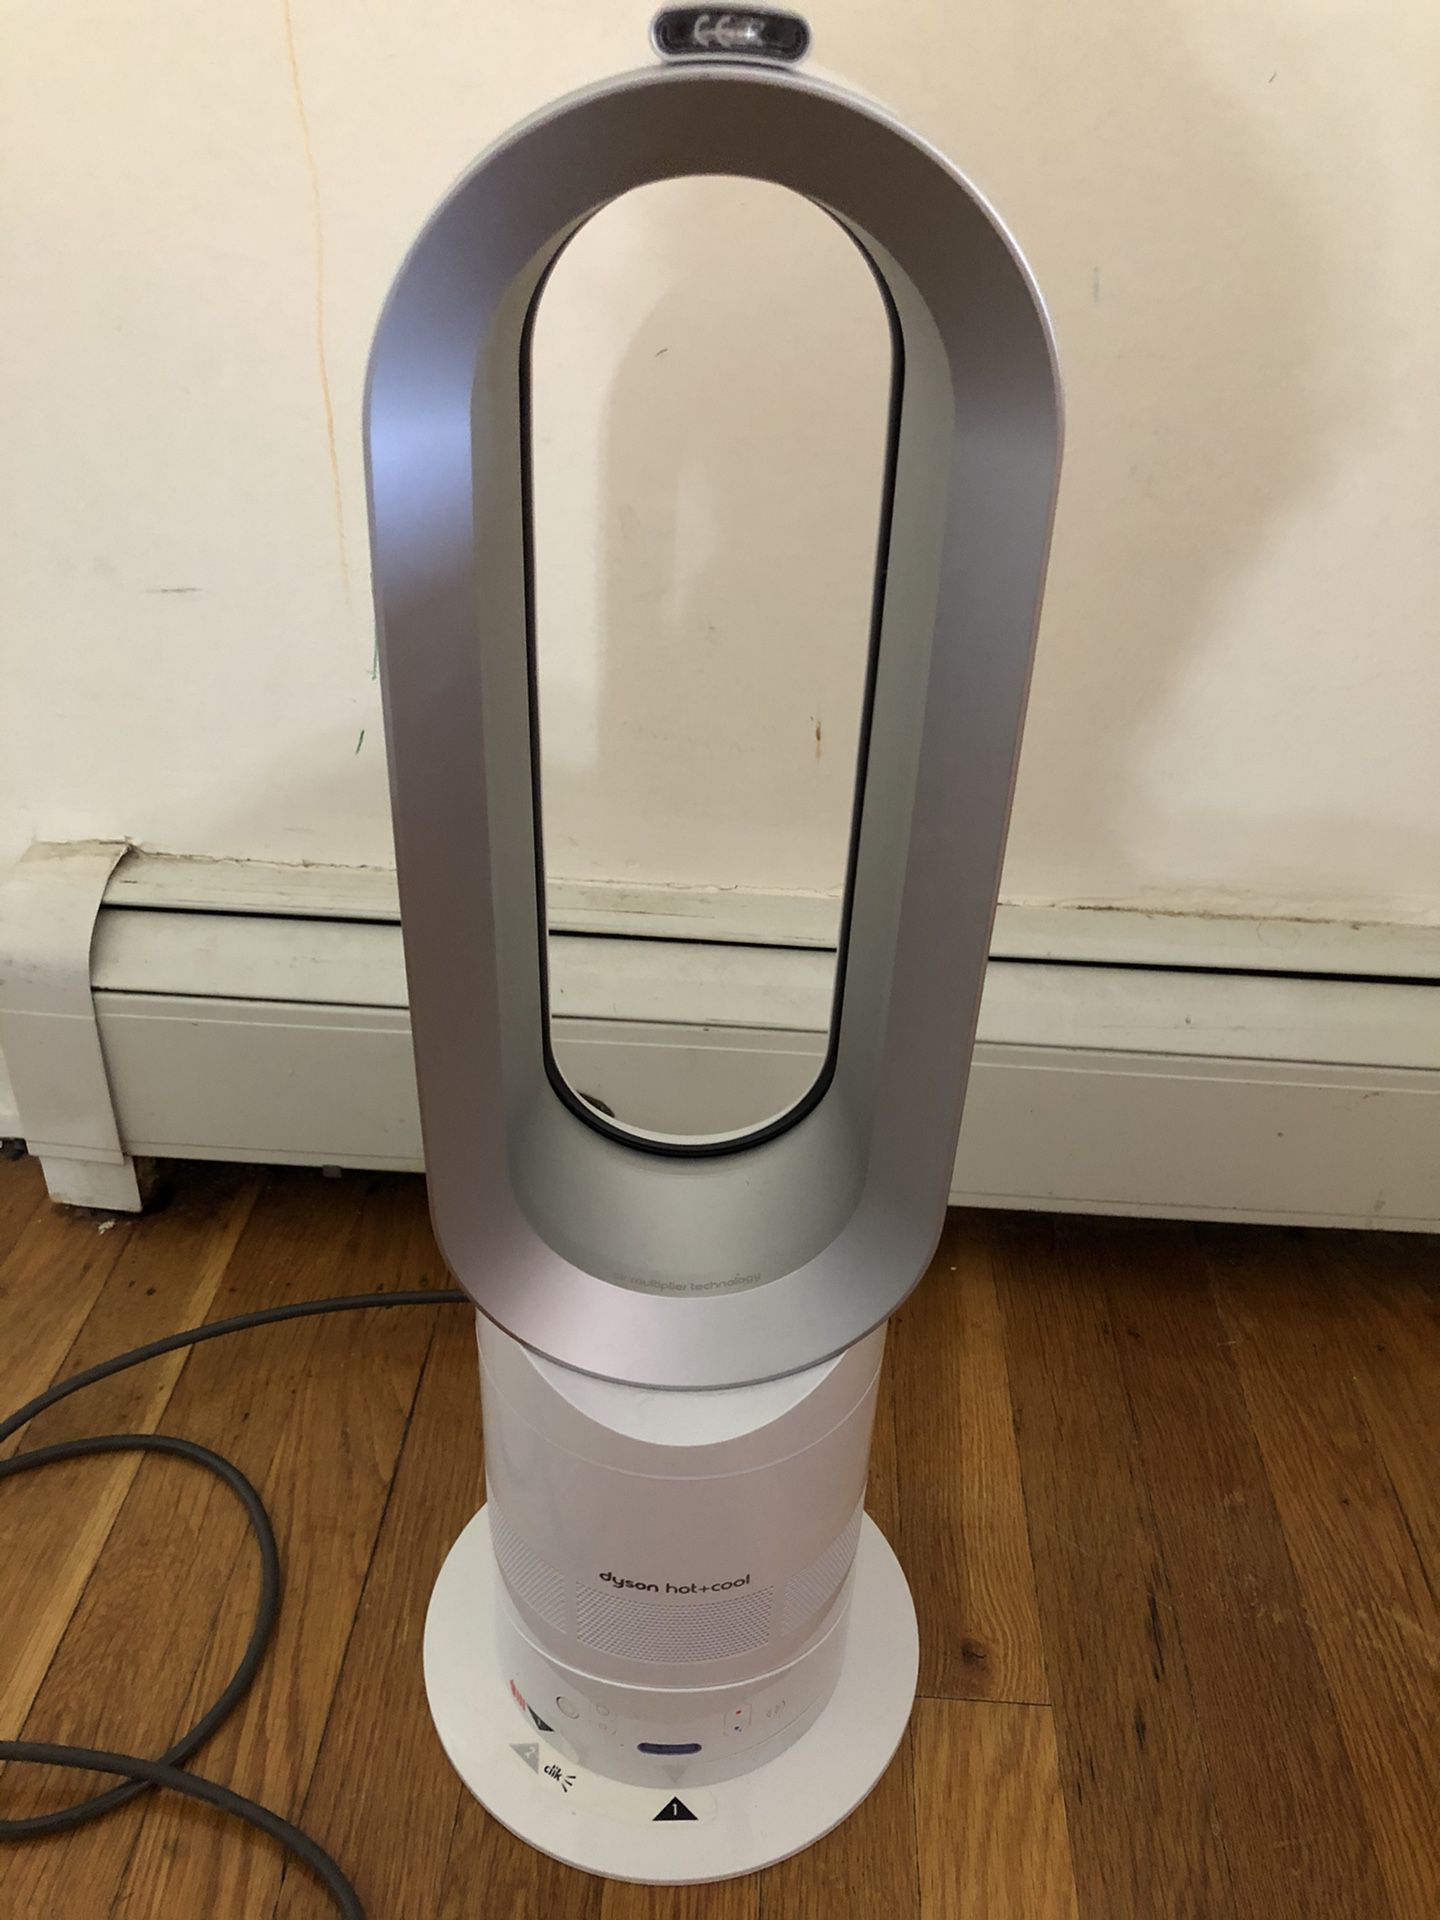 Dyson Hot+Cool Air Multiplier, Jet Focus Fan Heater White/grey - AM05  In very good condition , working perfect  Will ship in non-retail box.  Comes w